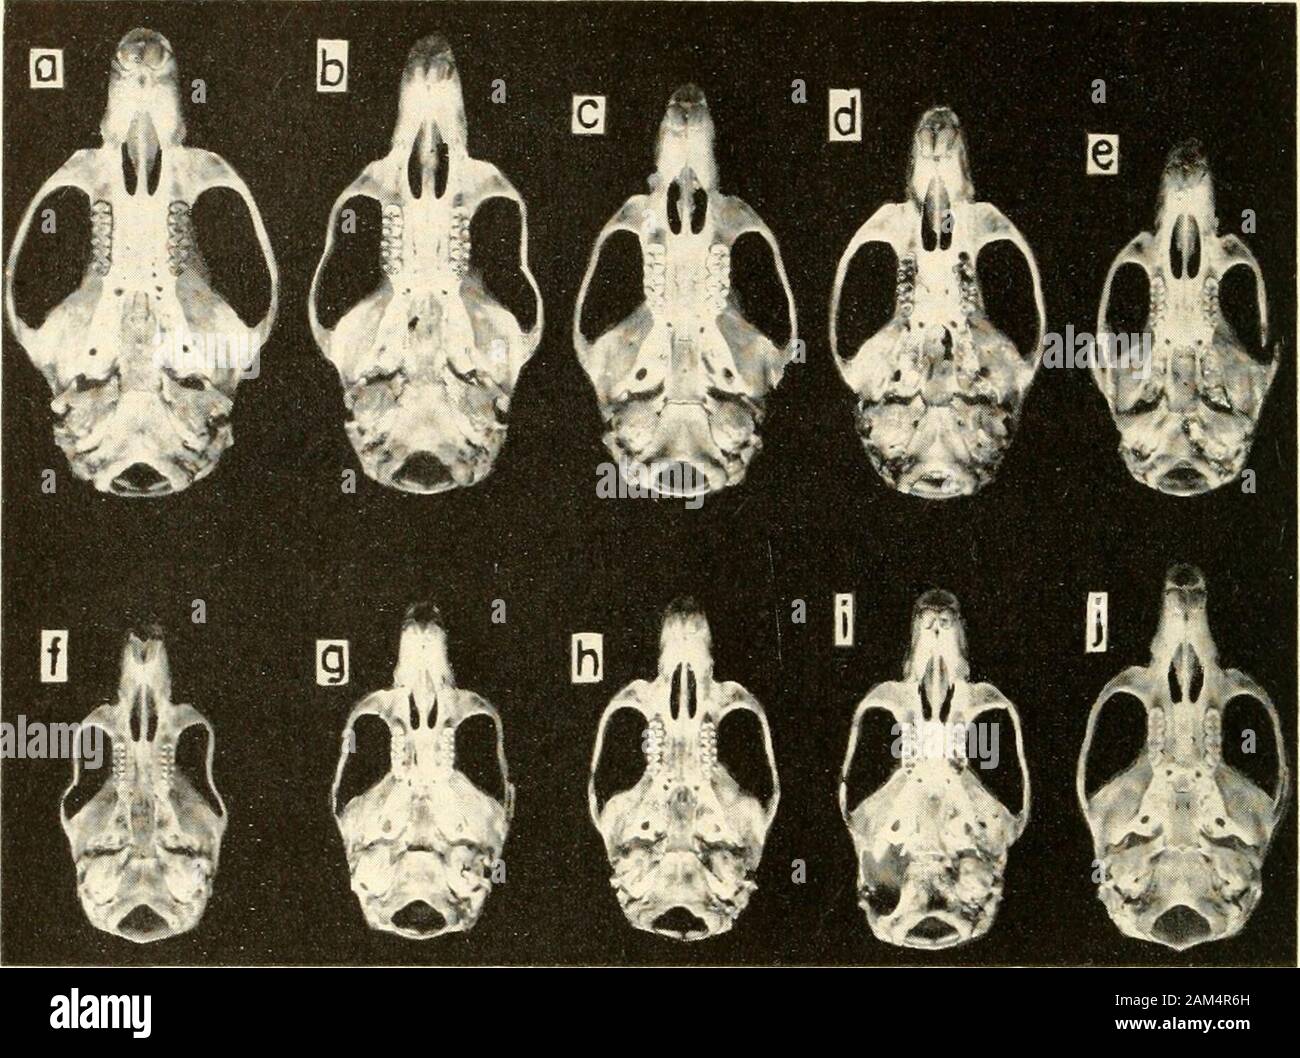 Proceedings of the United States National Museum . Dorsal aspect (X1 + ) of skull in cert3i subspecies oiOryzomys co7icolor (a-e) a-ndO. bicolor(J-j), showing variation in size with broad overlapping in the opposite extremes of eachspecies, a-c, Oryzomys concolor superans: a, Male (CNHAI 41459), Montalvo, RioBobonaza, Ecuador; b, female (CNHM 43257), Rio Pindo Yacu, Ecuador; c, female(CNHM 43252), Yana Rumi, Ecuador, d, e, Oryzomys concolor concolor: d, male (USNM280563), Pueblo Bello, Colombia; e, female (USNlM 280583), El Orinoco, Rio Cesar,Colombia. /, g, i, Oryzomys bicolor bicolor, males: Stock Photo